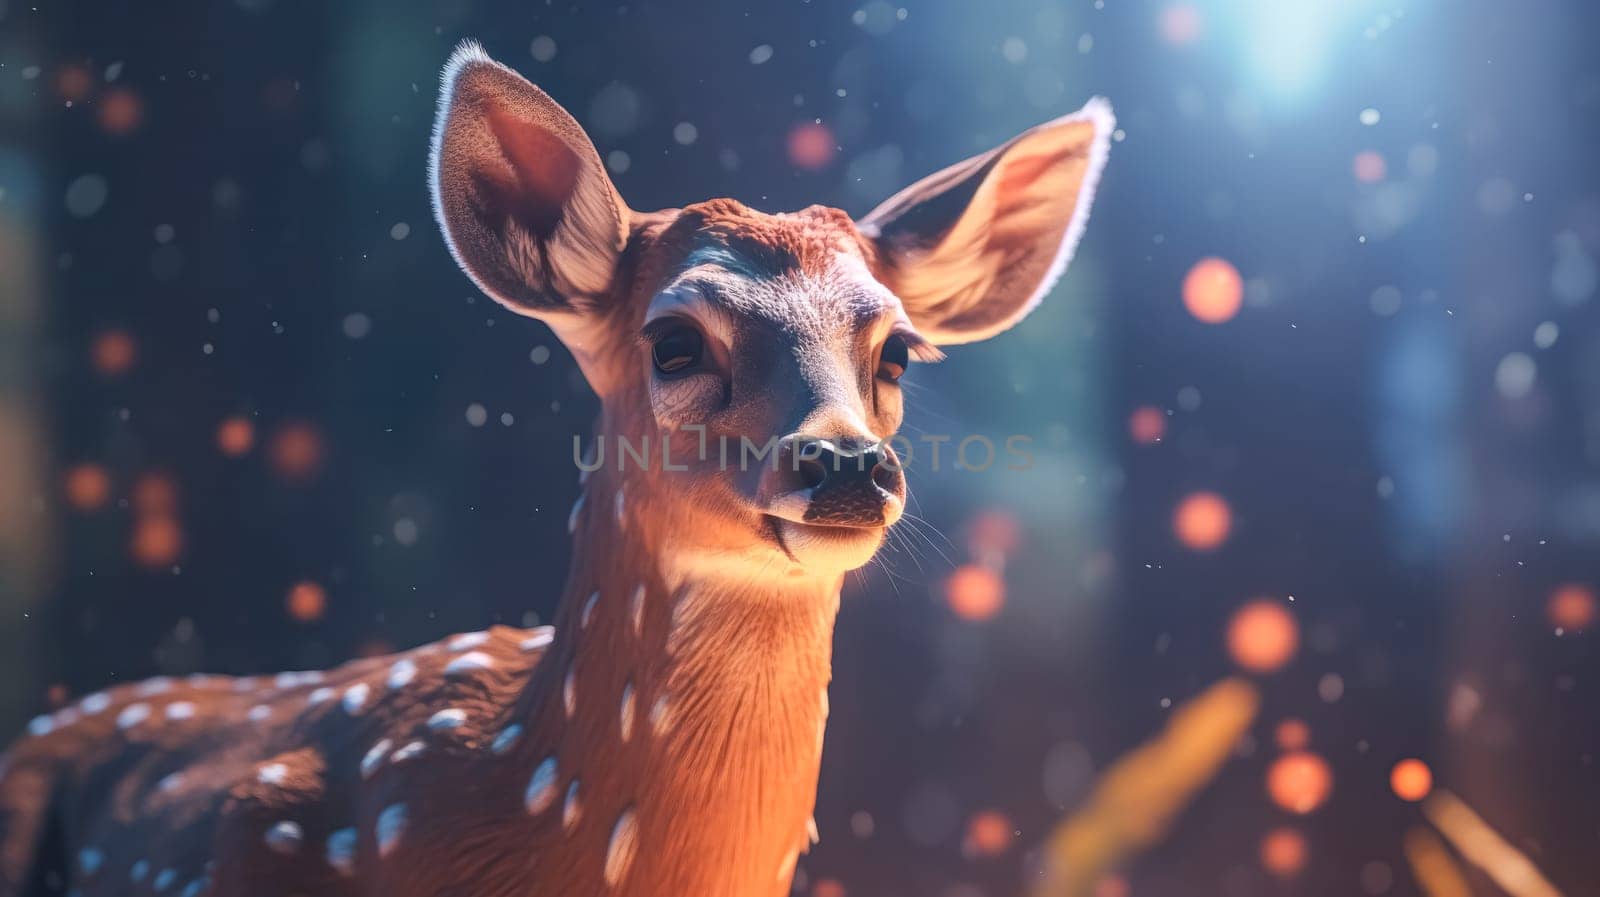 A deer with white spots on its face is standing in the woods. The image has a peaceful and serene mood, as the deer is surrounded by nature and he is enjoying its surroundings